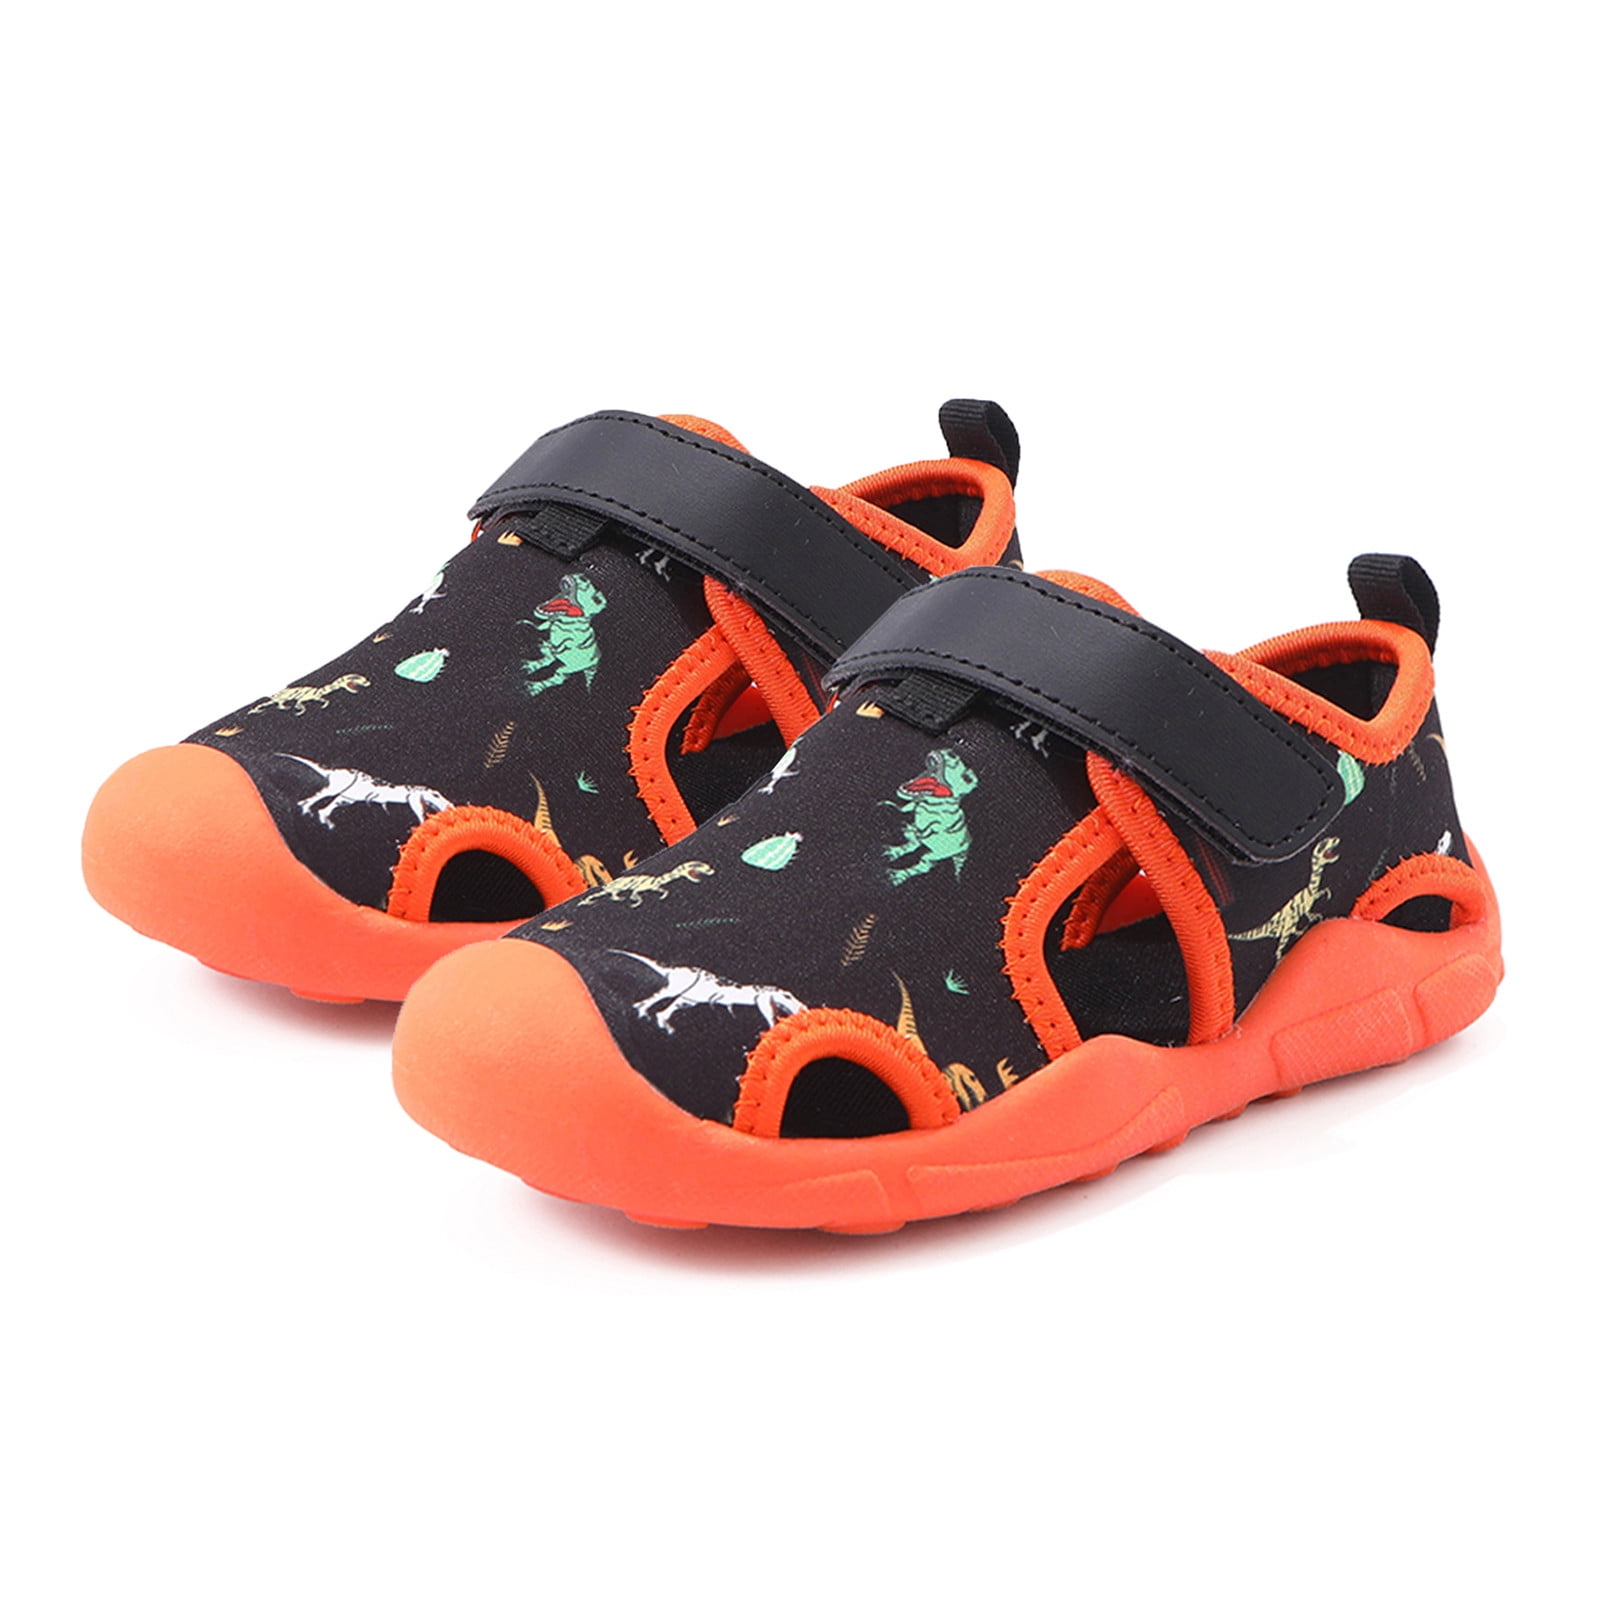 Toddler Kids Baby Girls Boys Children Closed Toe Beach Shoes Sandals Sneakers 